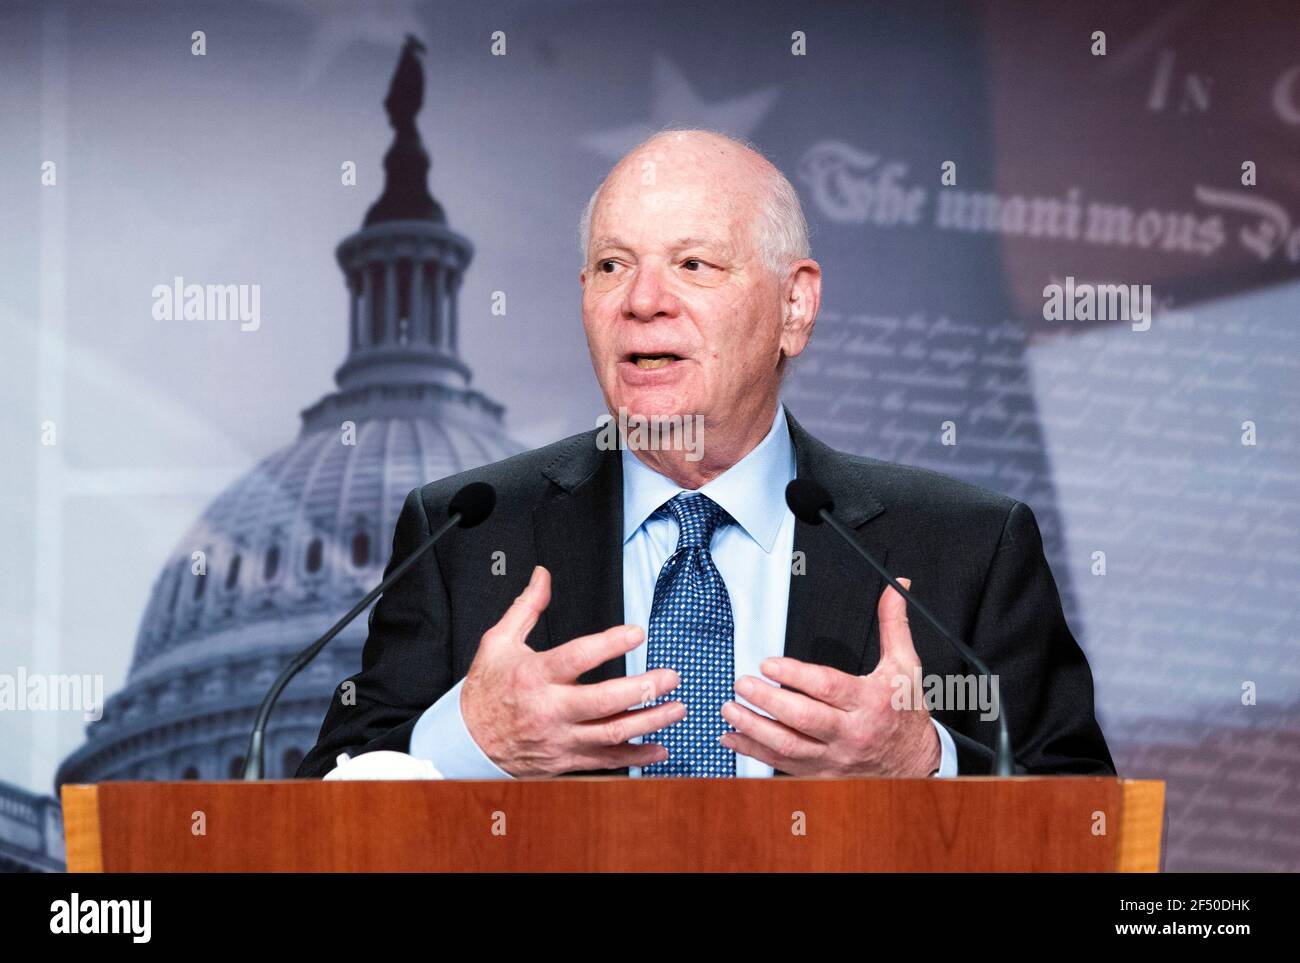 Washington, USA. 23rd Mar, 2021. Sen. Ben Cardin, D-MD, speaks during a press conference on Capitol Hill in Washington, DC on Tuesday, March 23, 2021. Cardin spoke on the need for extended COIVD-19 financial relief for small businesses. Photo by Kevin Dietsch/Pool/Sipa USA Credit: Sipa USA/Alamy Live News Stock Photo